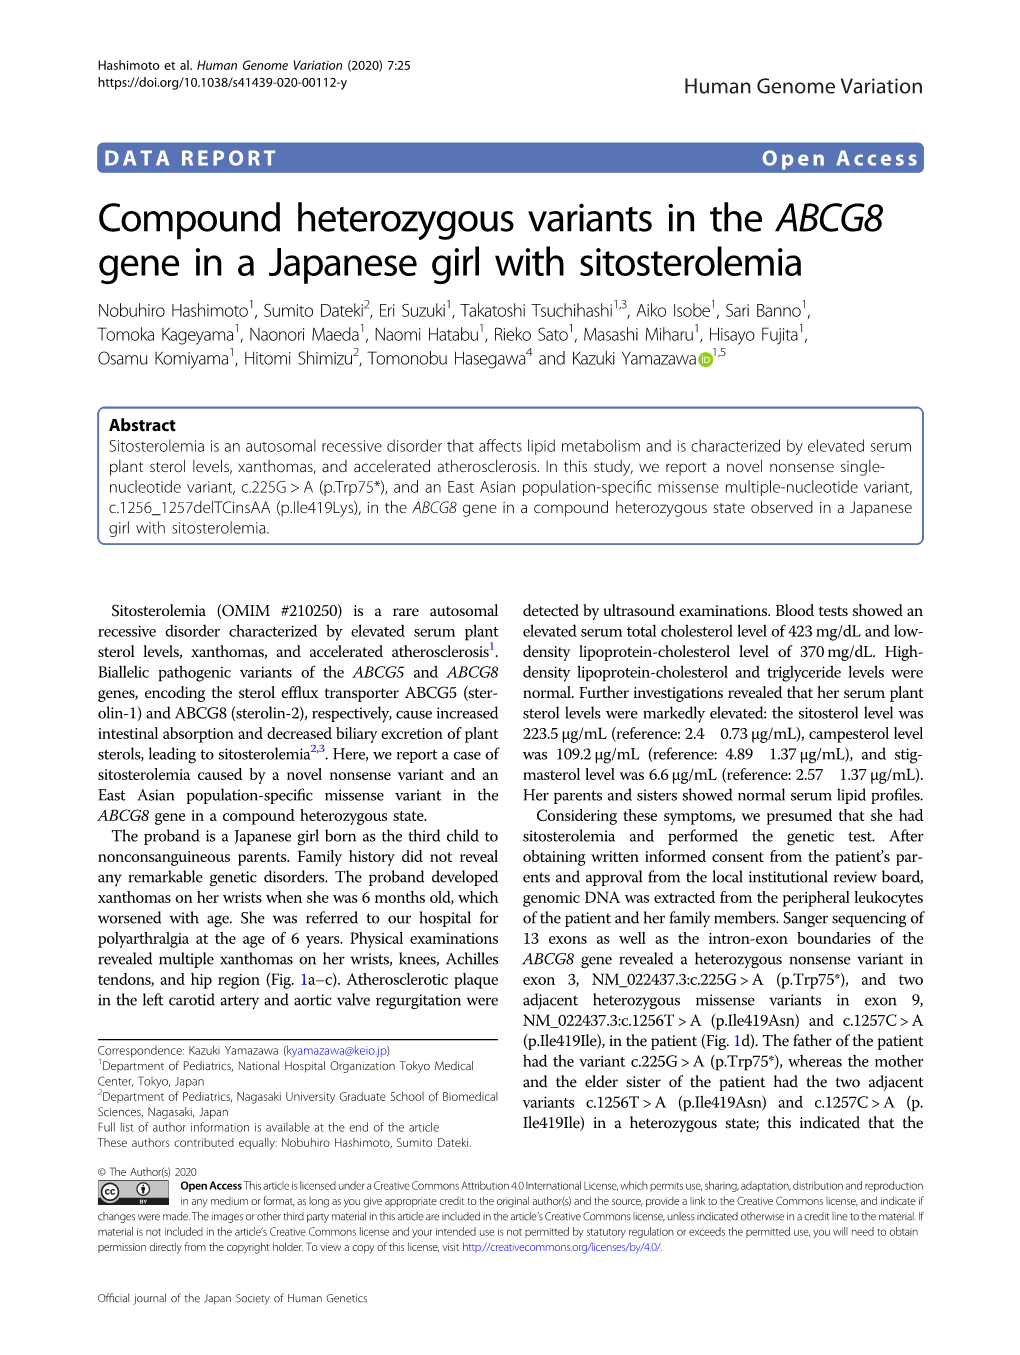 Compound Heterozygous Variants in the ABCG8 Gene in a Japanese Girl